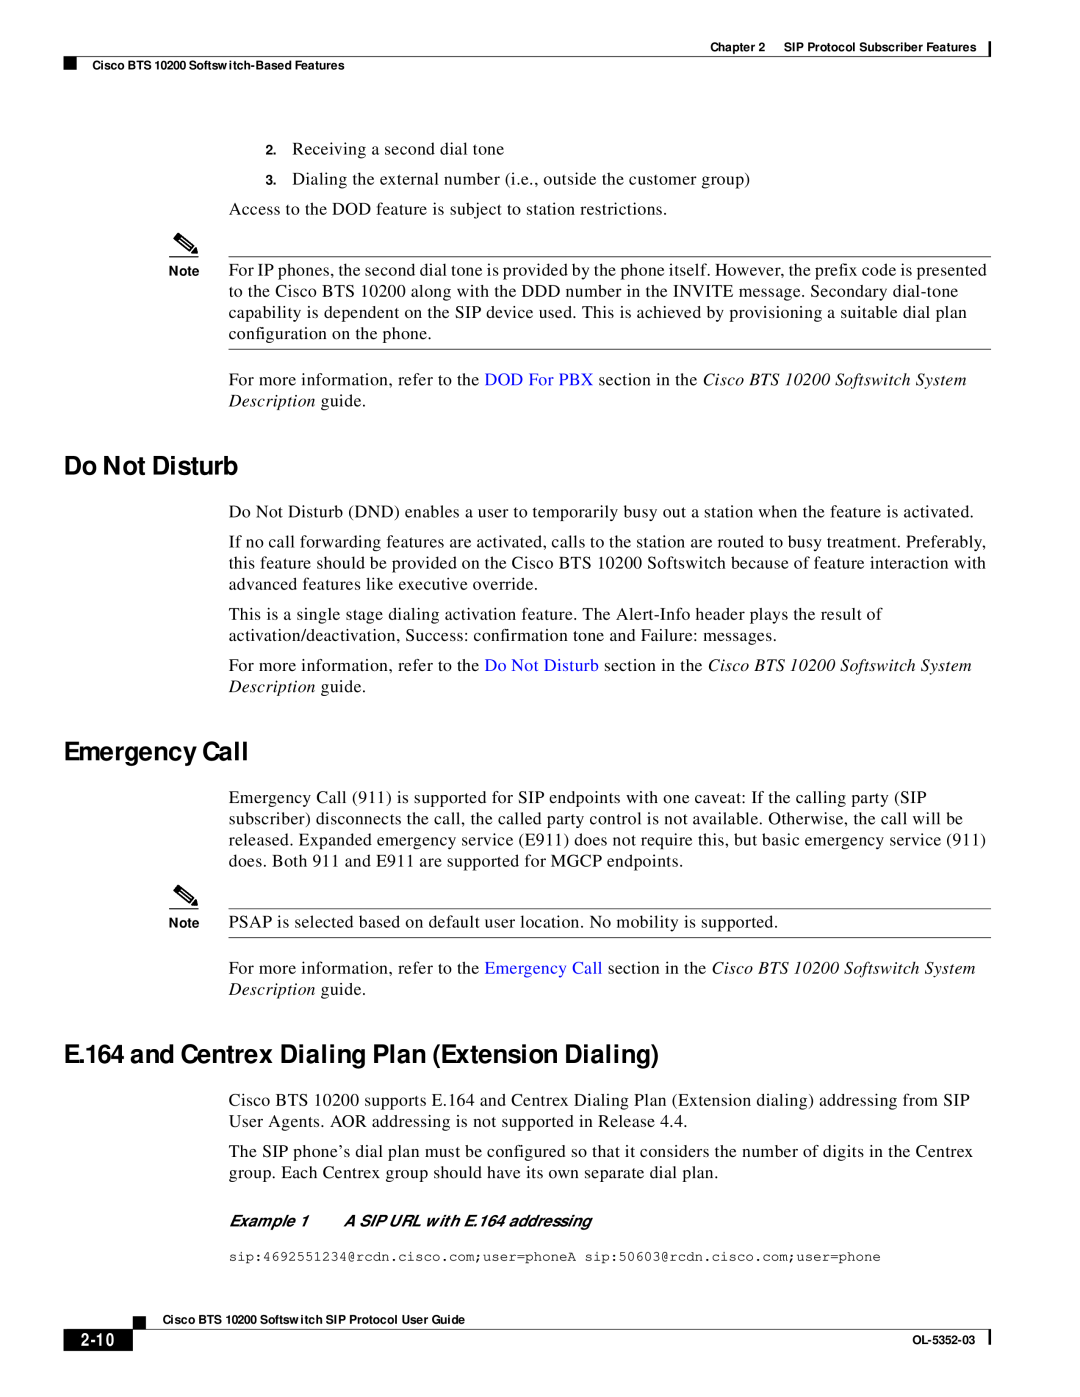 Cisco Systems BTS 10200 manual Do Not Disturb, Emergency Call, E.164 and Centrex Dialing Plan Extension Dialing, 2-10 